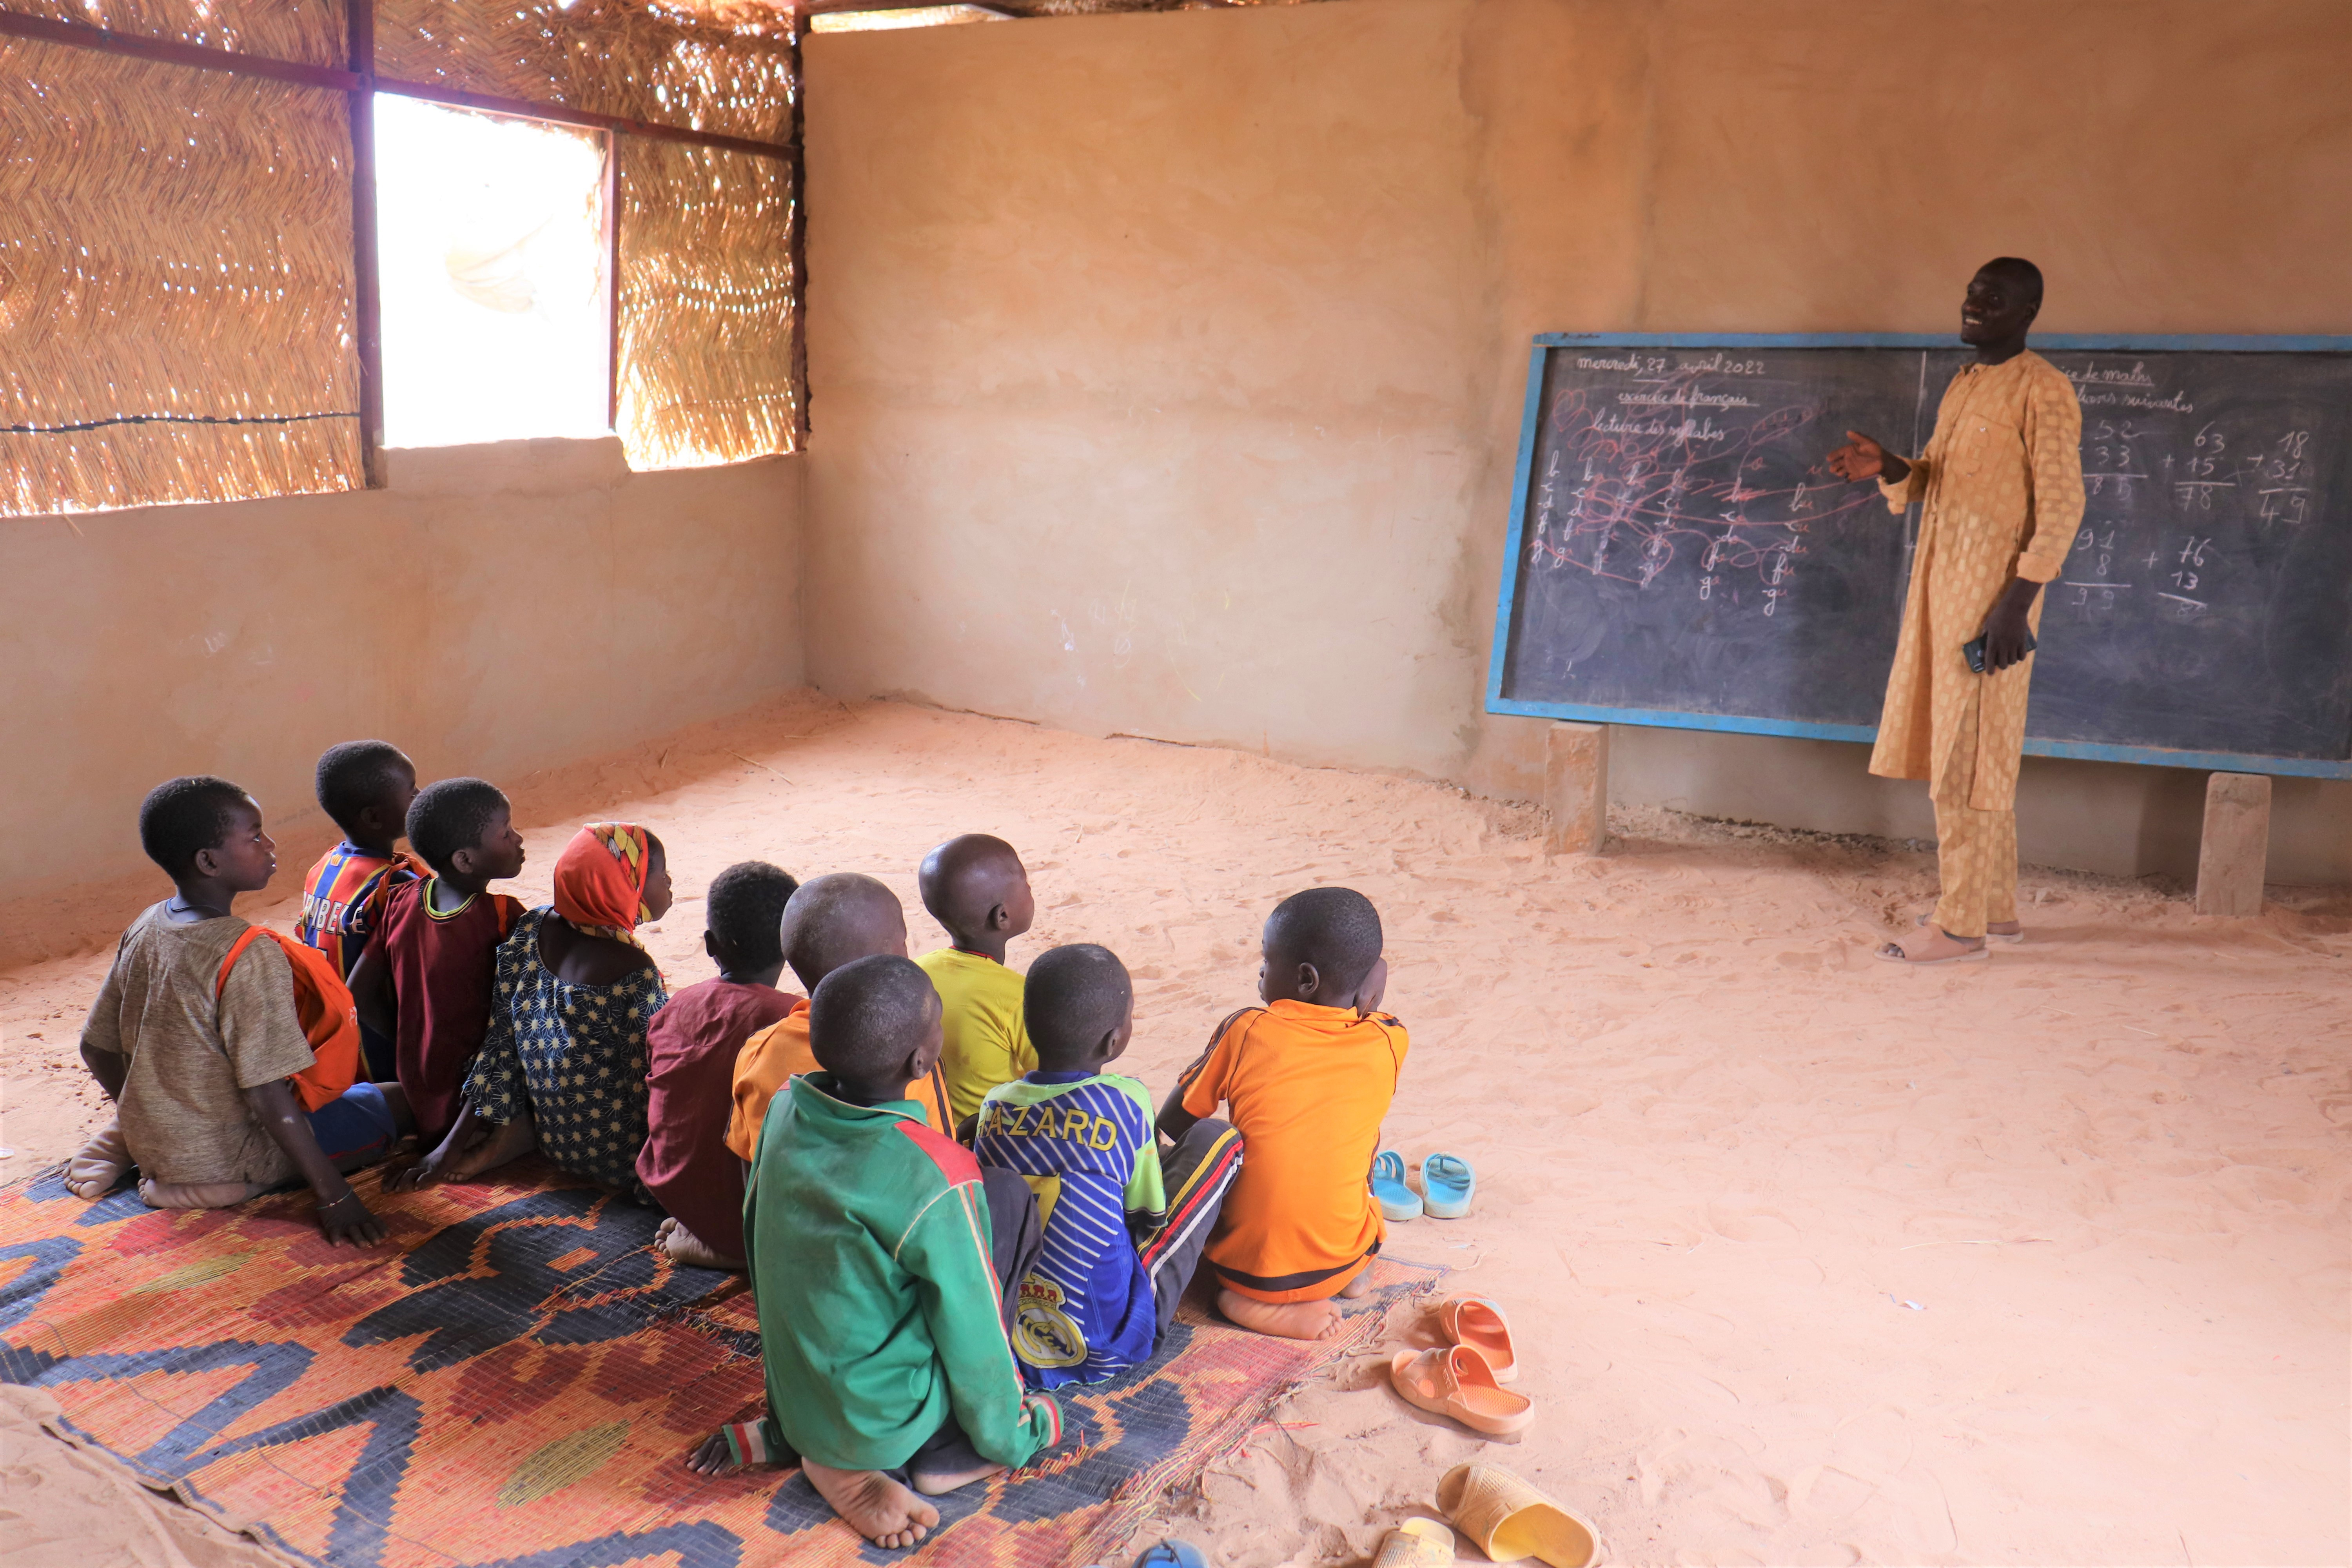 Children sit on a dirt floor inside a classroom in front of the teacher standing next to the chalkboard